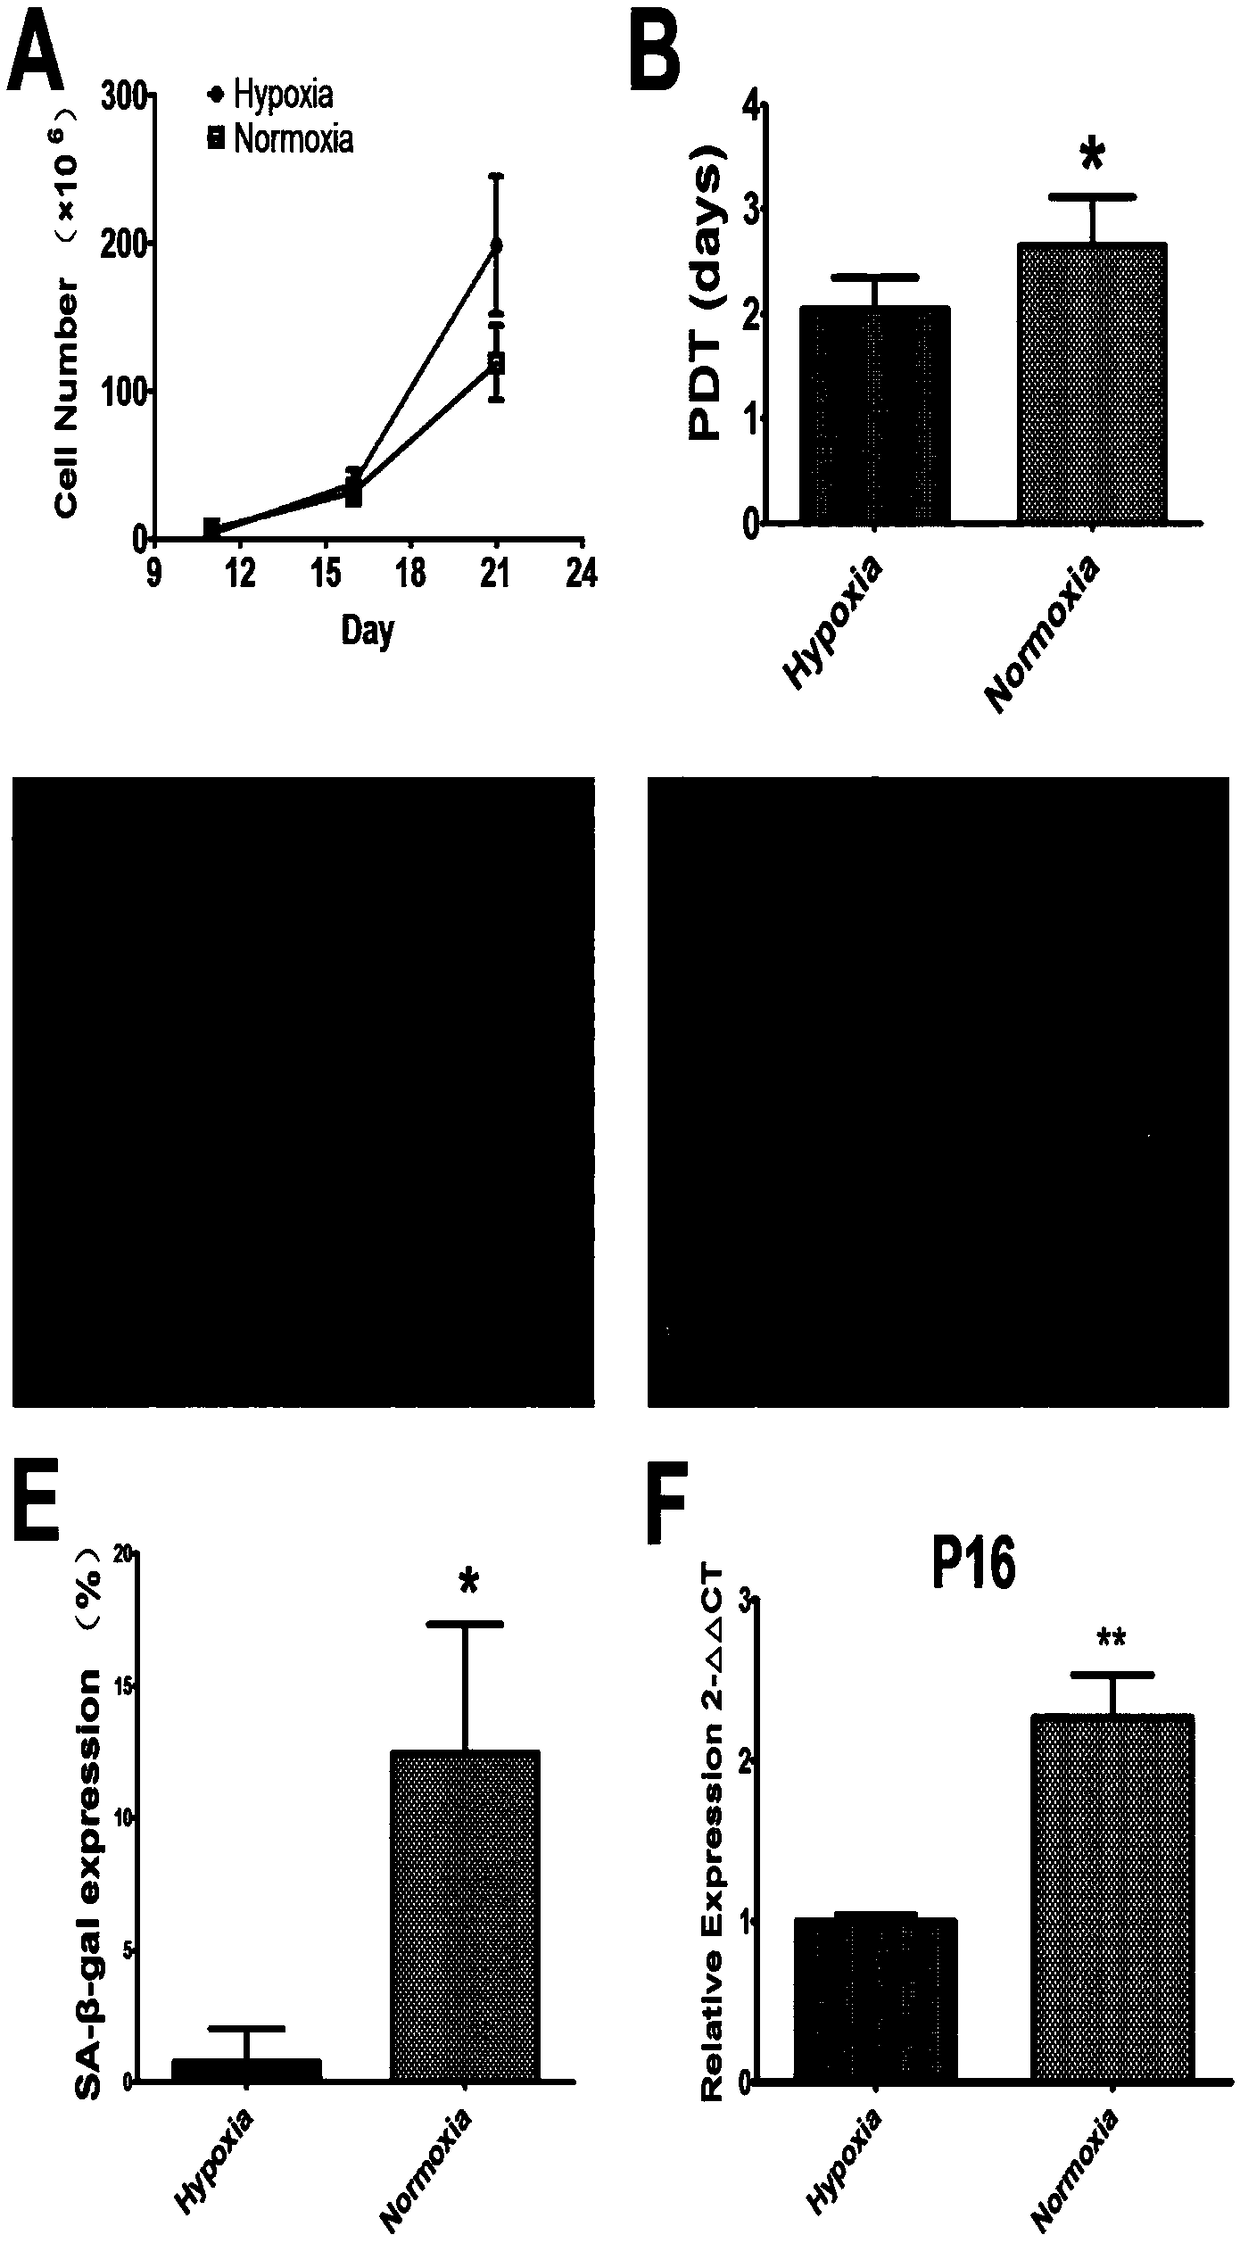 Method for ex vivo expansion of human vascular endothelial progenitor cells in low oxygen condition